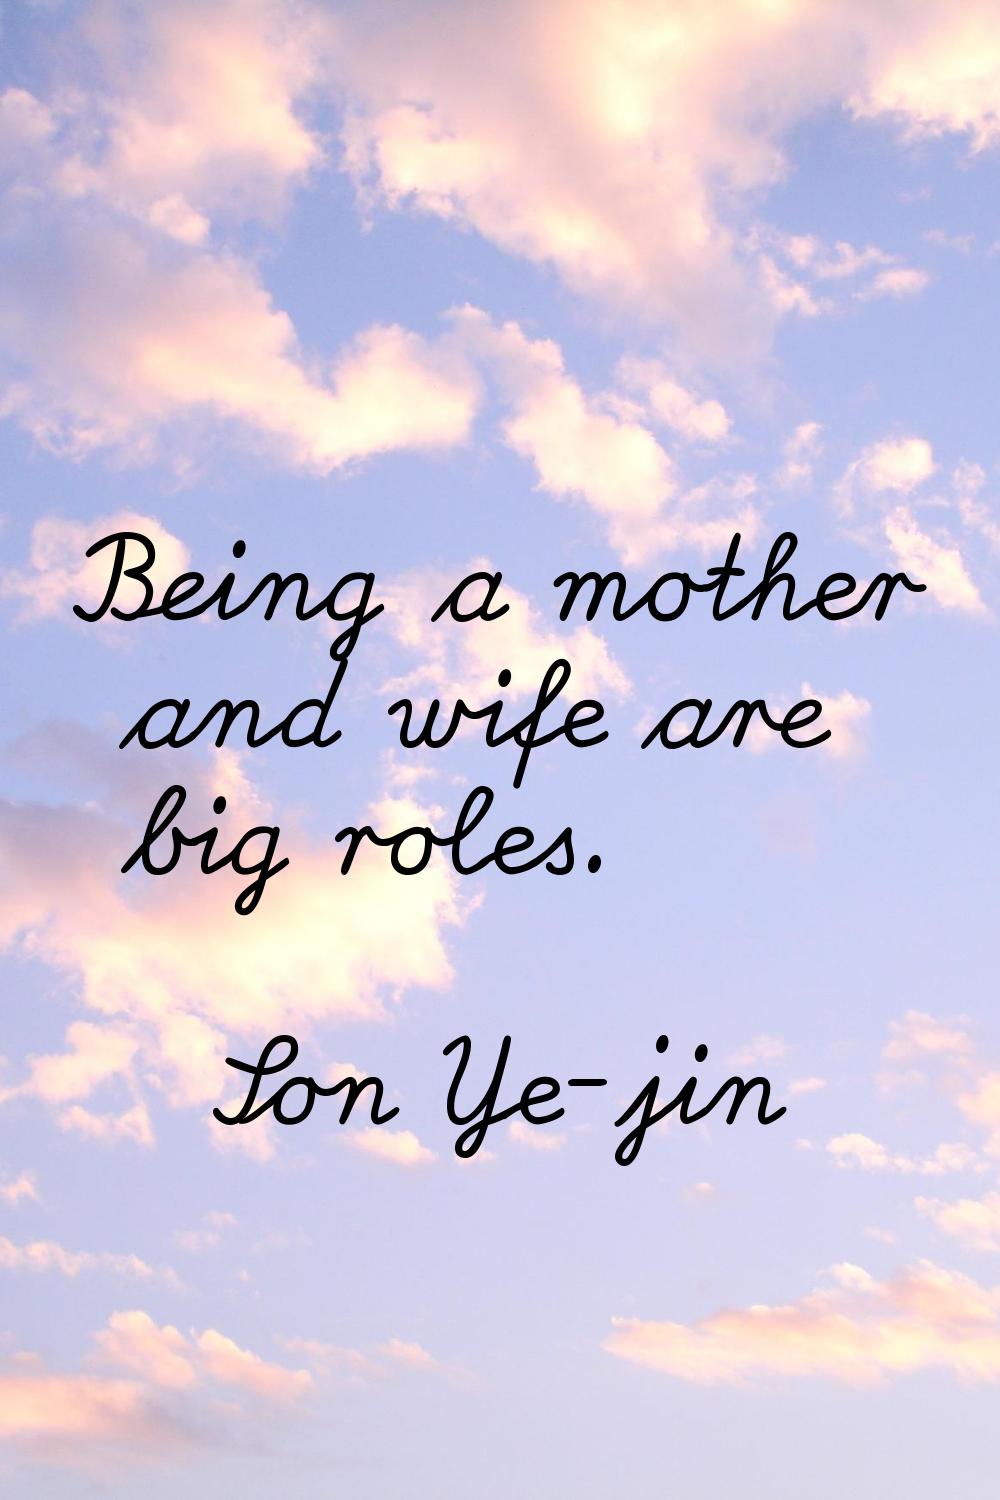 Being a mother and wife are big roles.